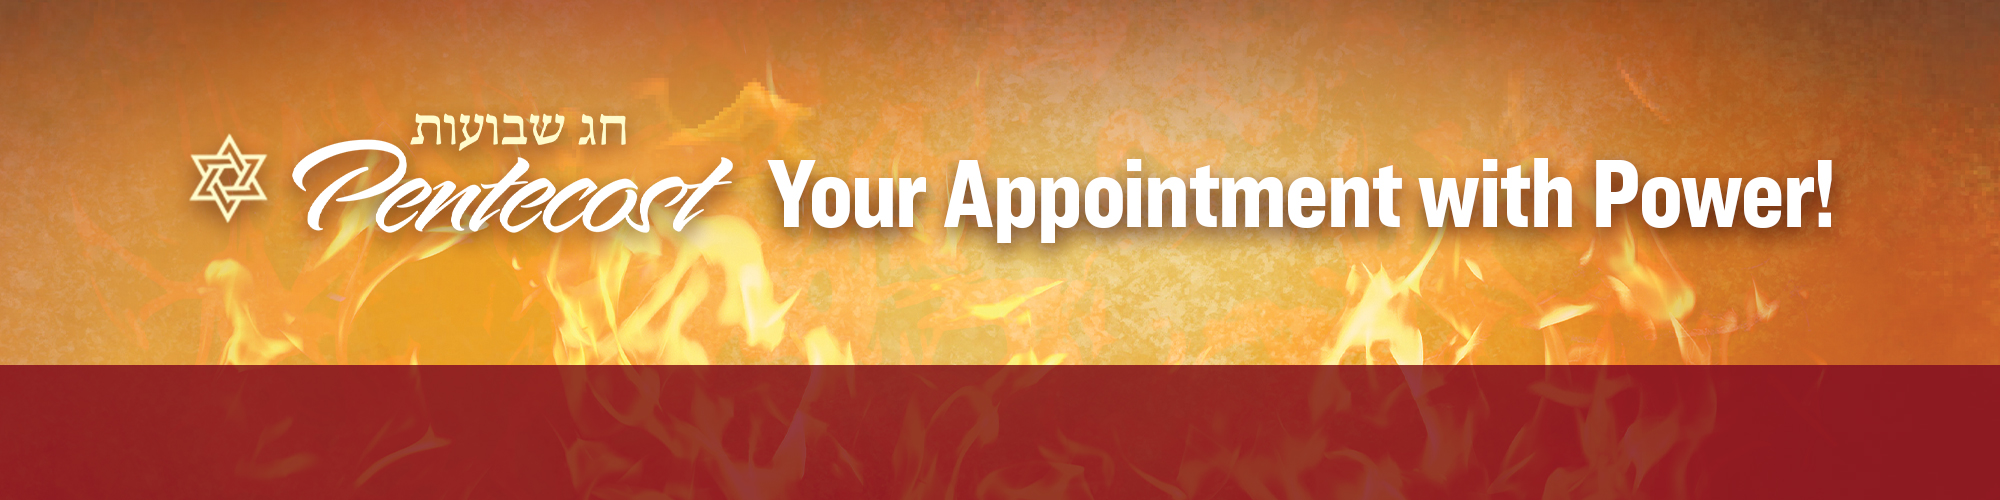 Pentecost - Your Appointment with Power!